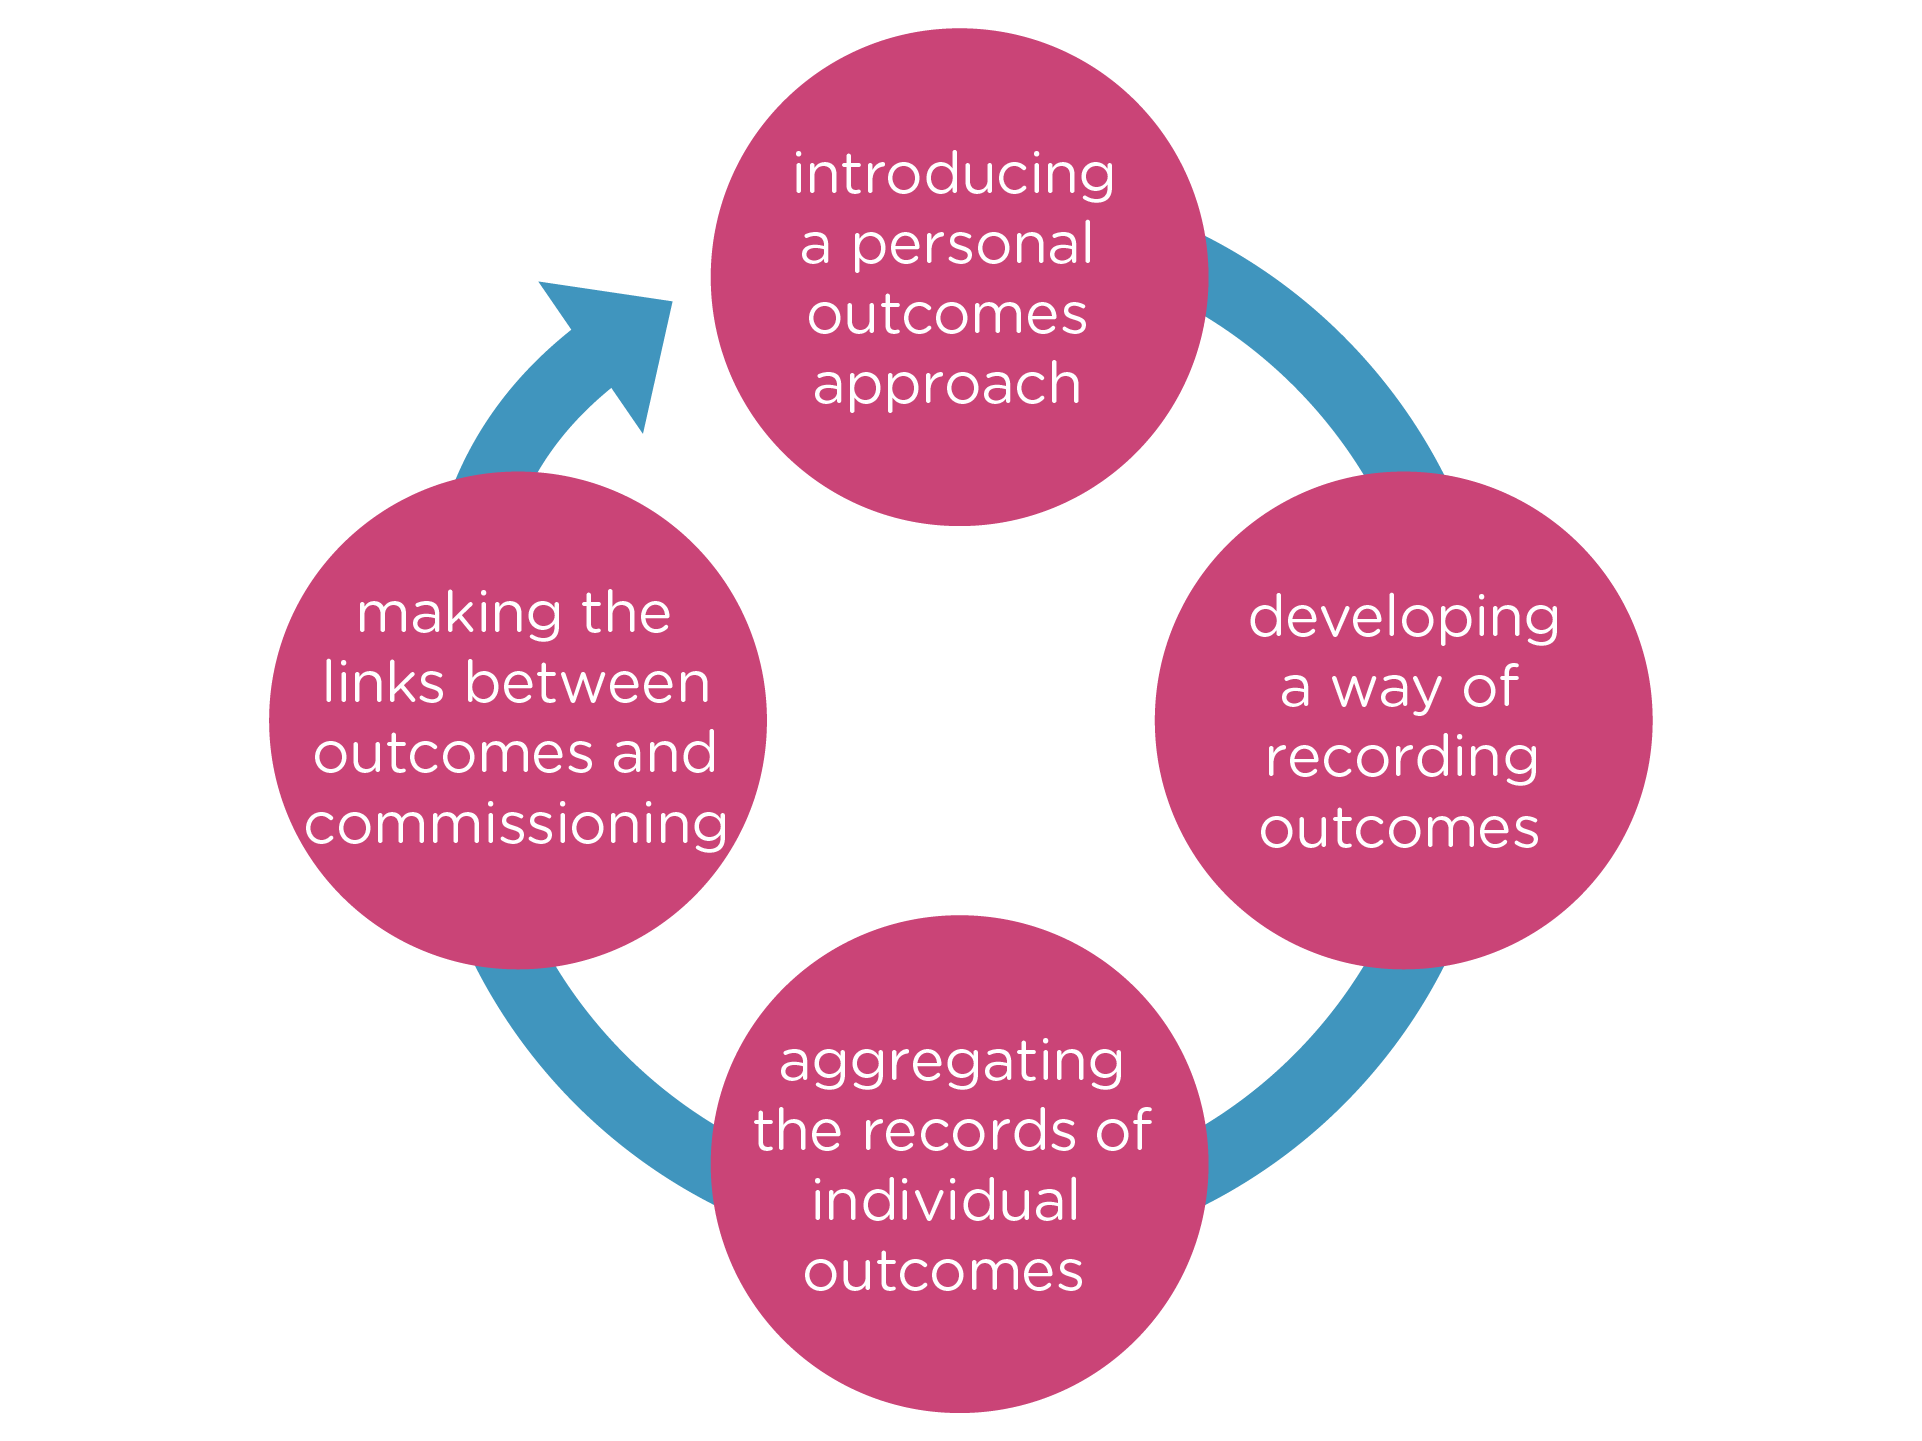 Introducing a personal outcomes approach. Making the links between outcomes and commissioning. Developing a way of recording outcomes. Aggregating the records of individual outcomes.